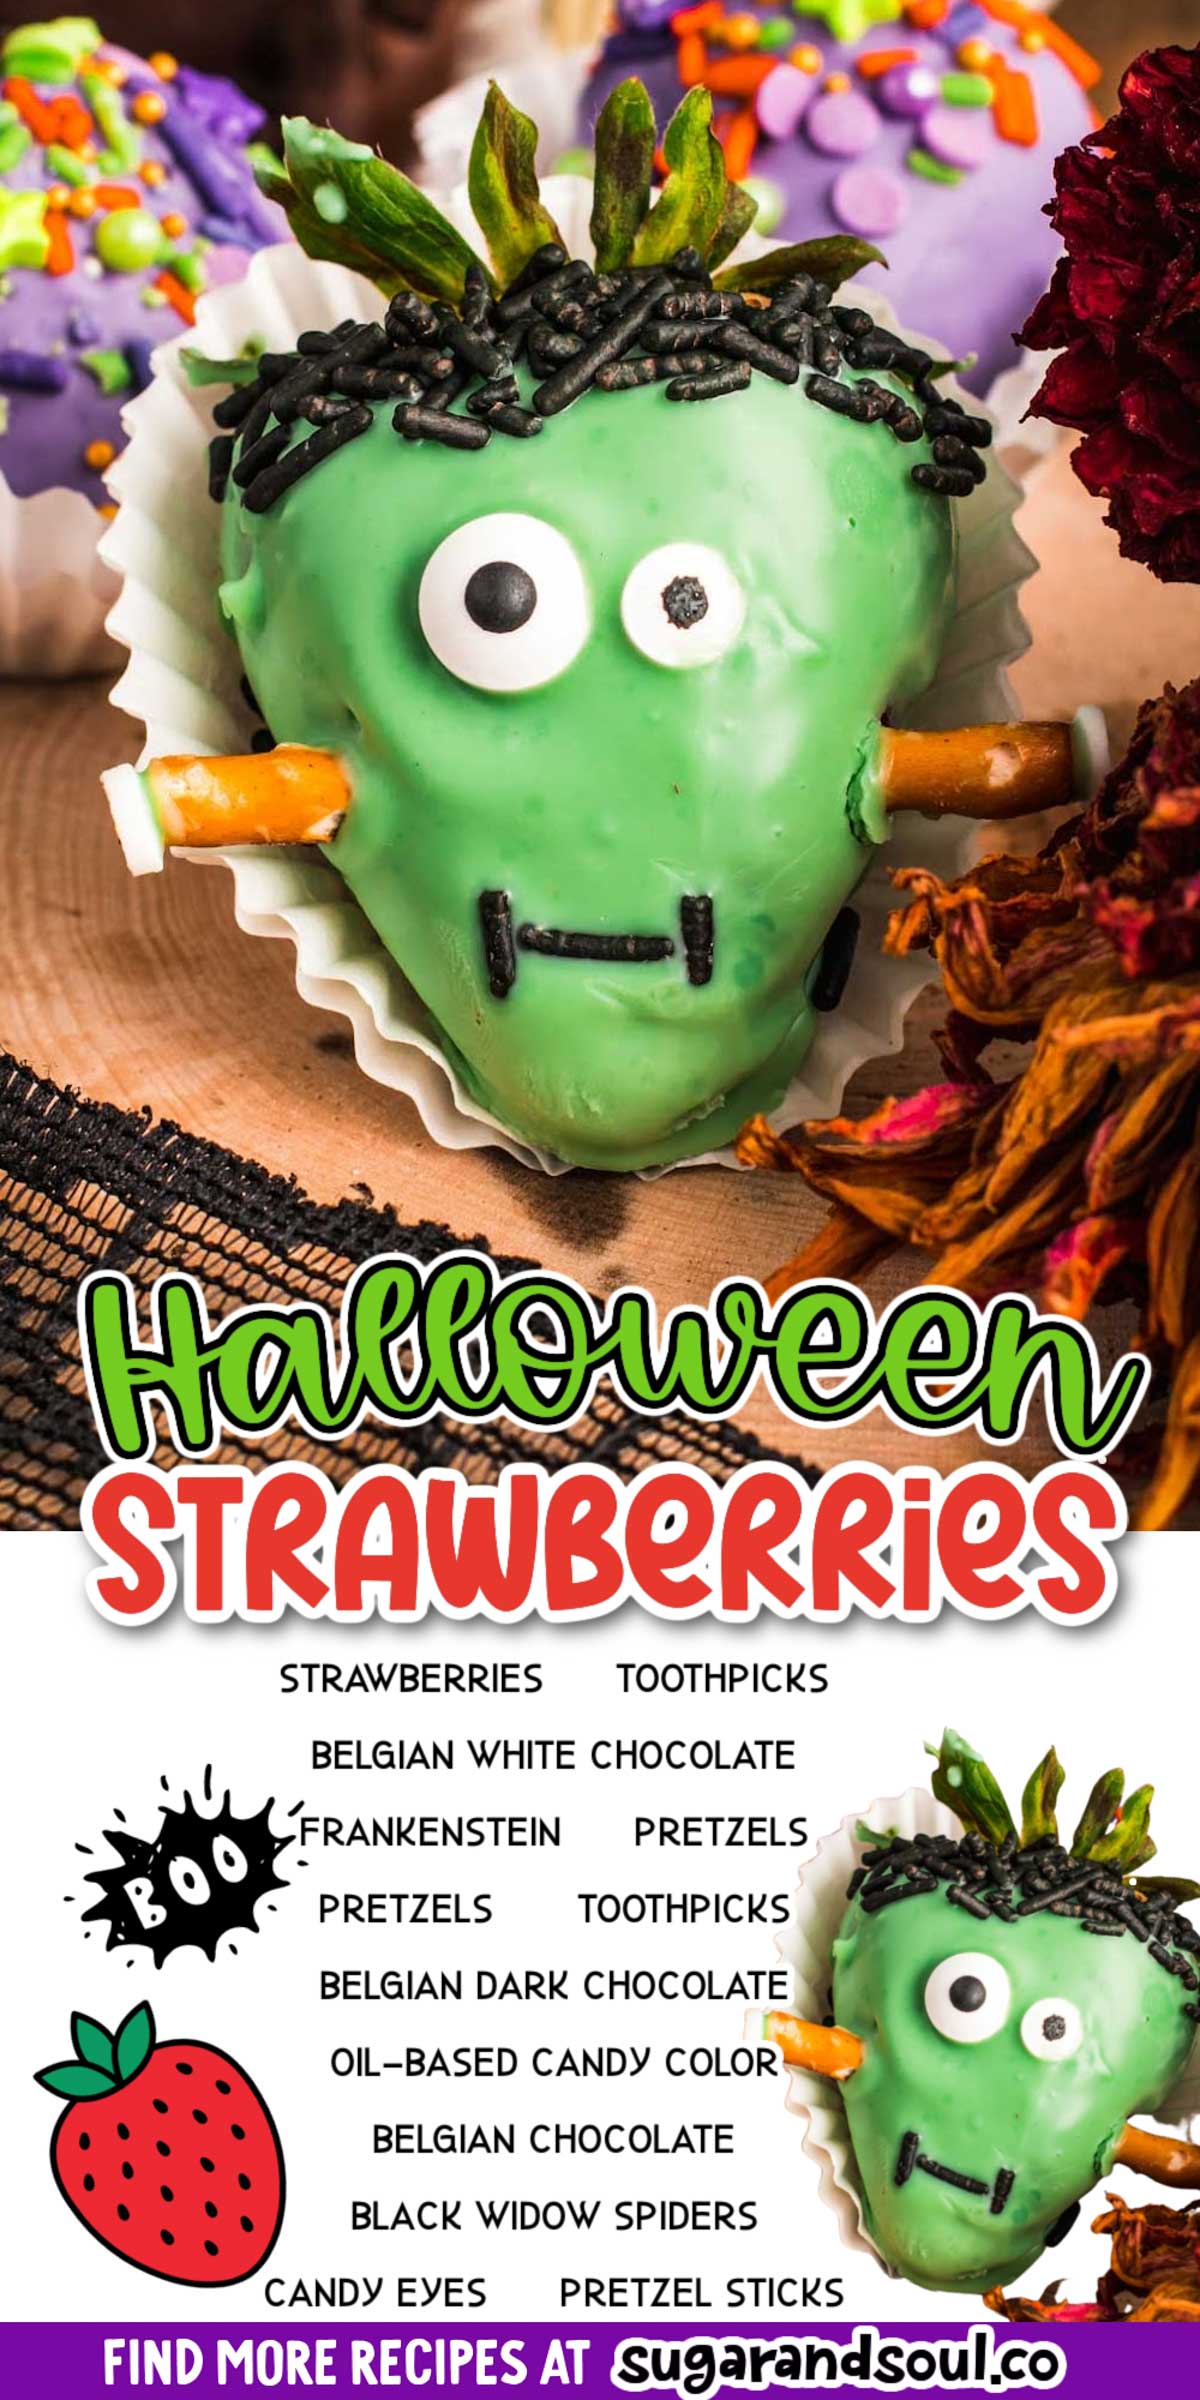 Halloween Chocolate Covered Strawberries are a treat the family can make together using juicy berries, melted chocolate, and edible decorations! This festive dessert is sure to disappear in no time! via @sugarandsoulco